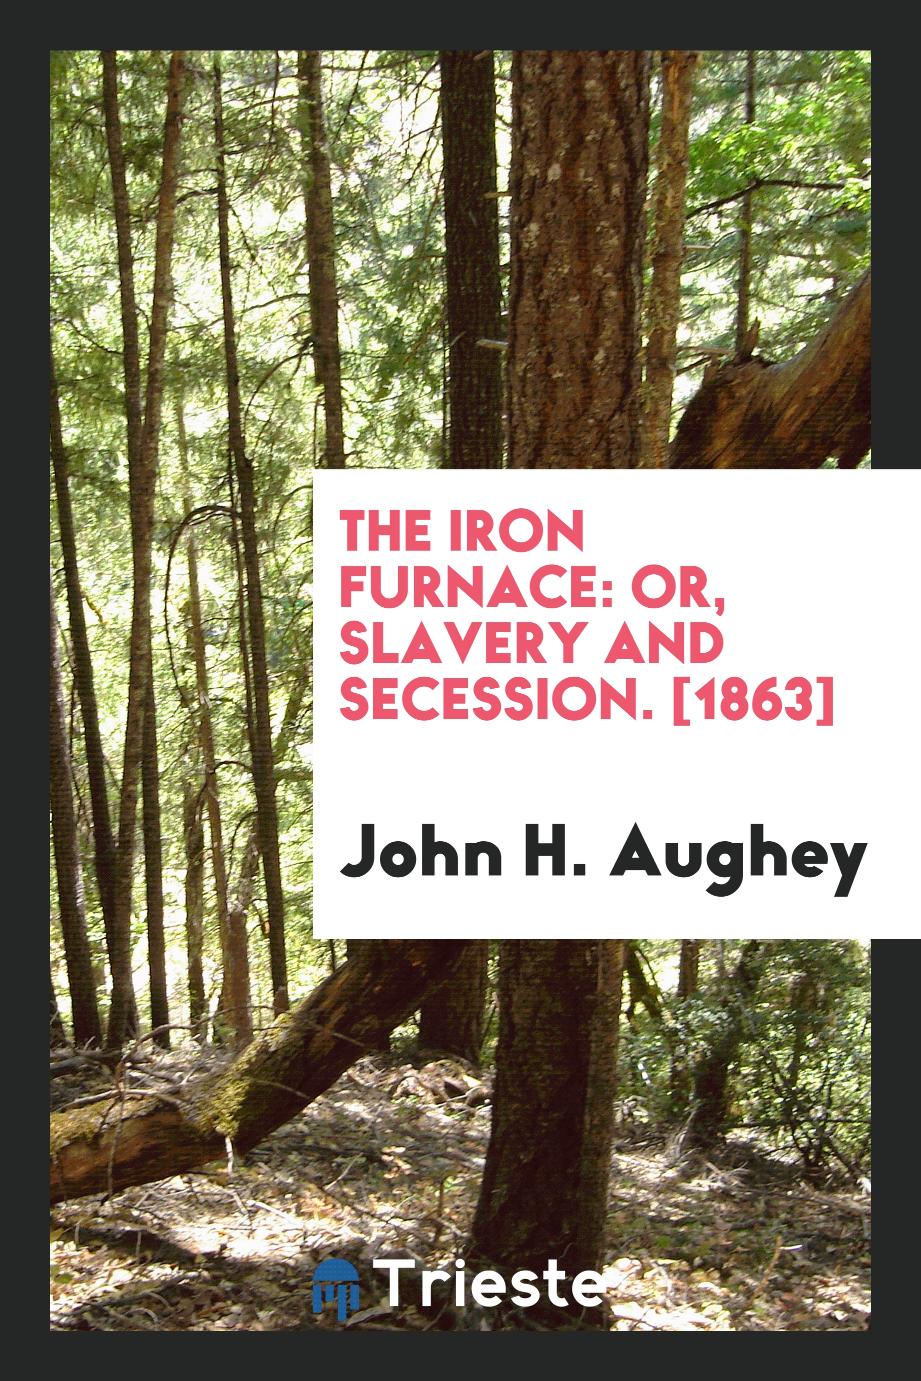 The Iron Furnace: Or, Slavery and Secession. [1863]